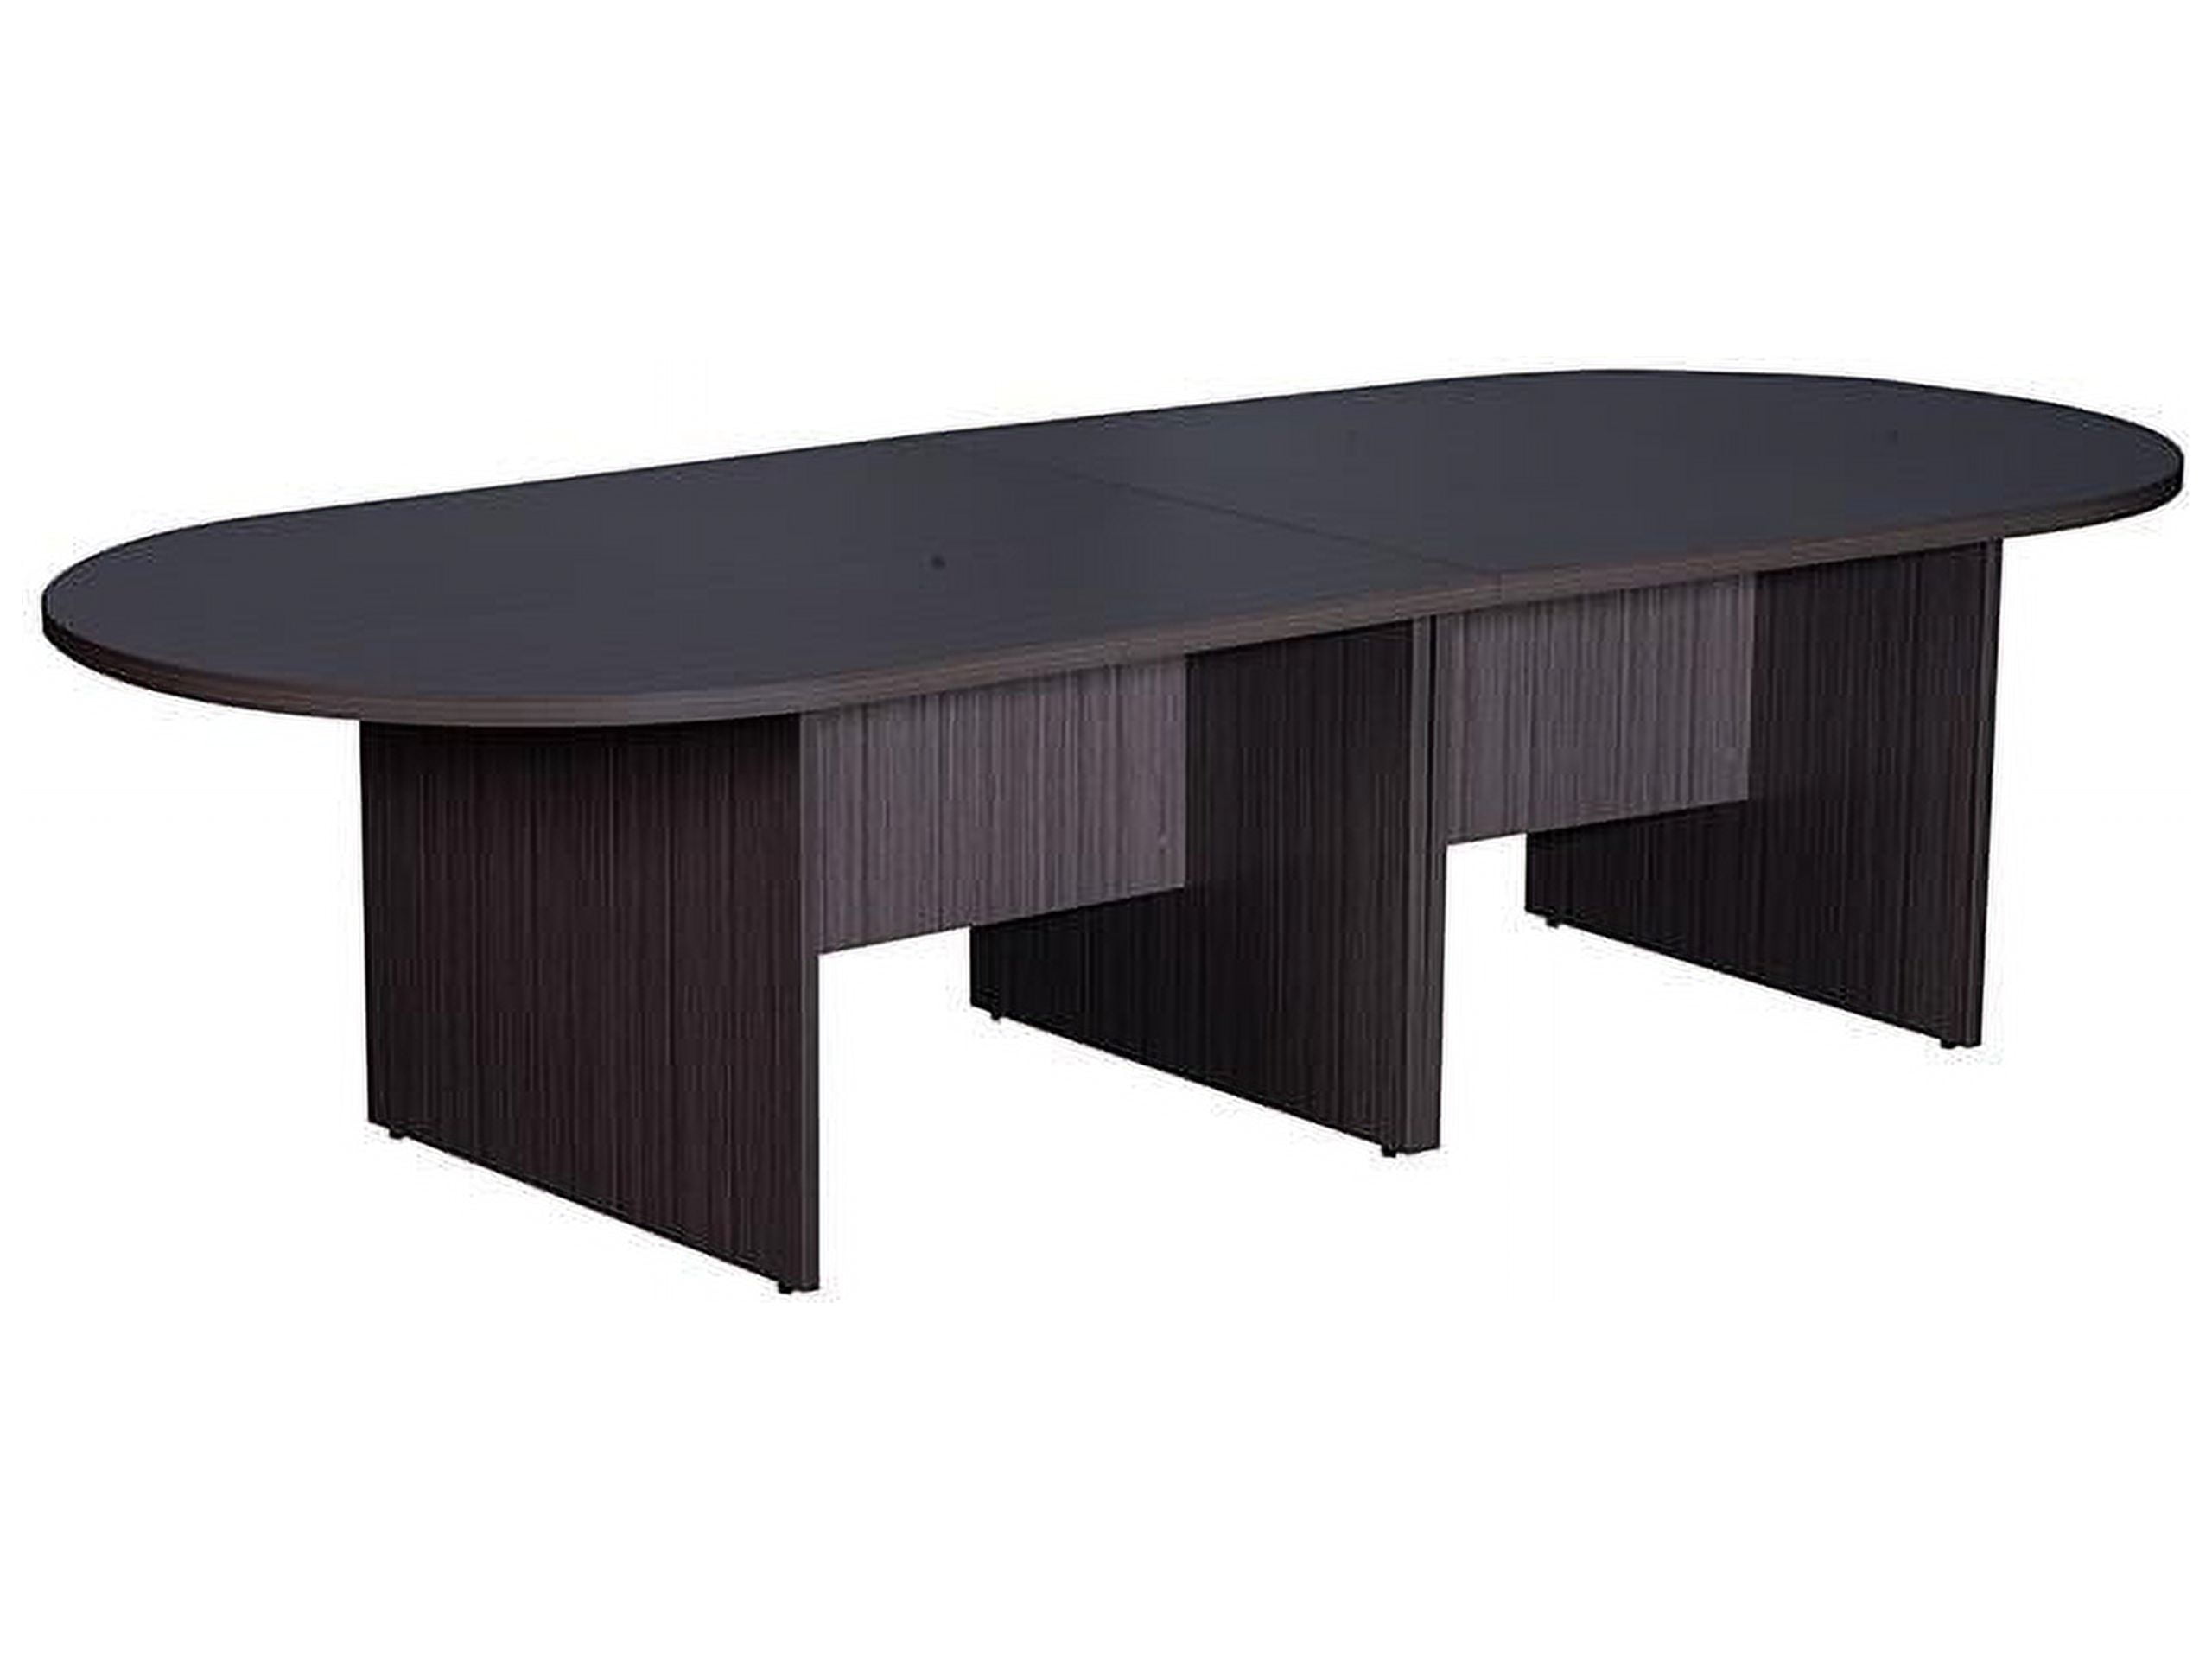 N137-dw 10 Ft. Race Track Conference Table - Driftwood